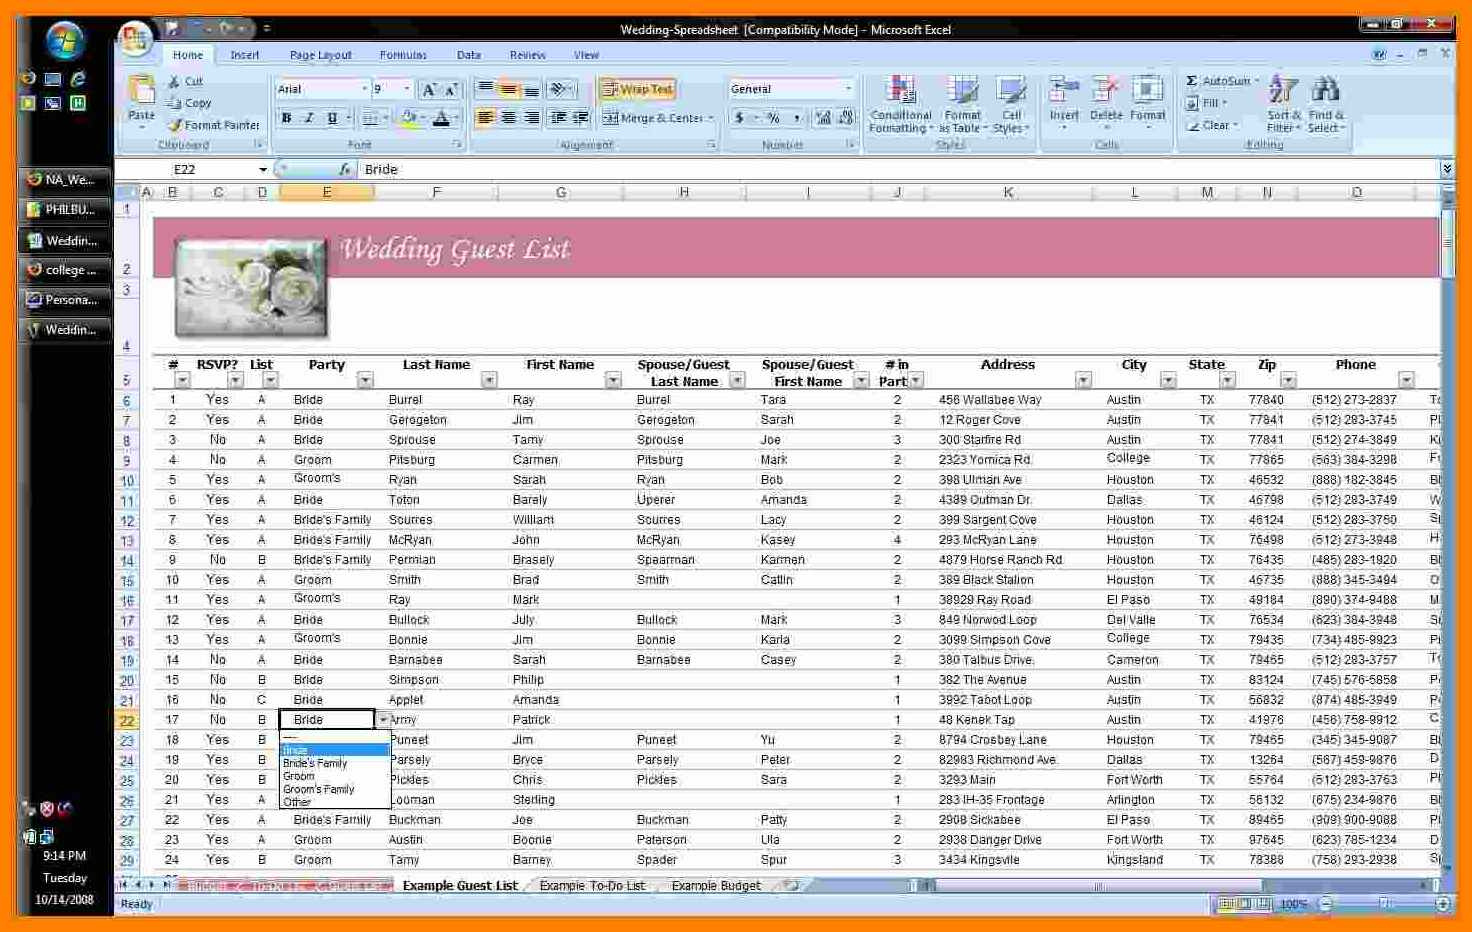 Excel Spreadsheet For Wedding Guest List Regarding Sampleding Guest List Spreadsheet Example Excel As Software How To